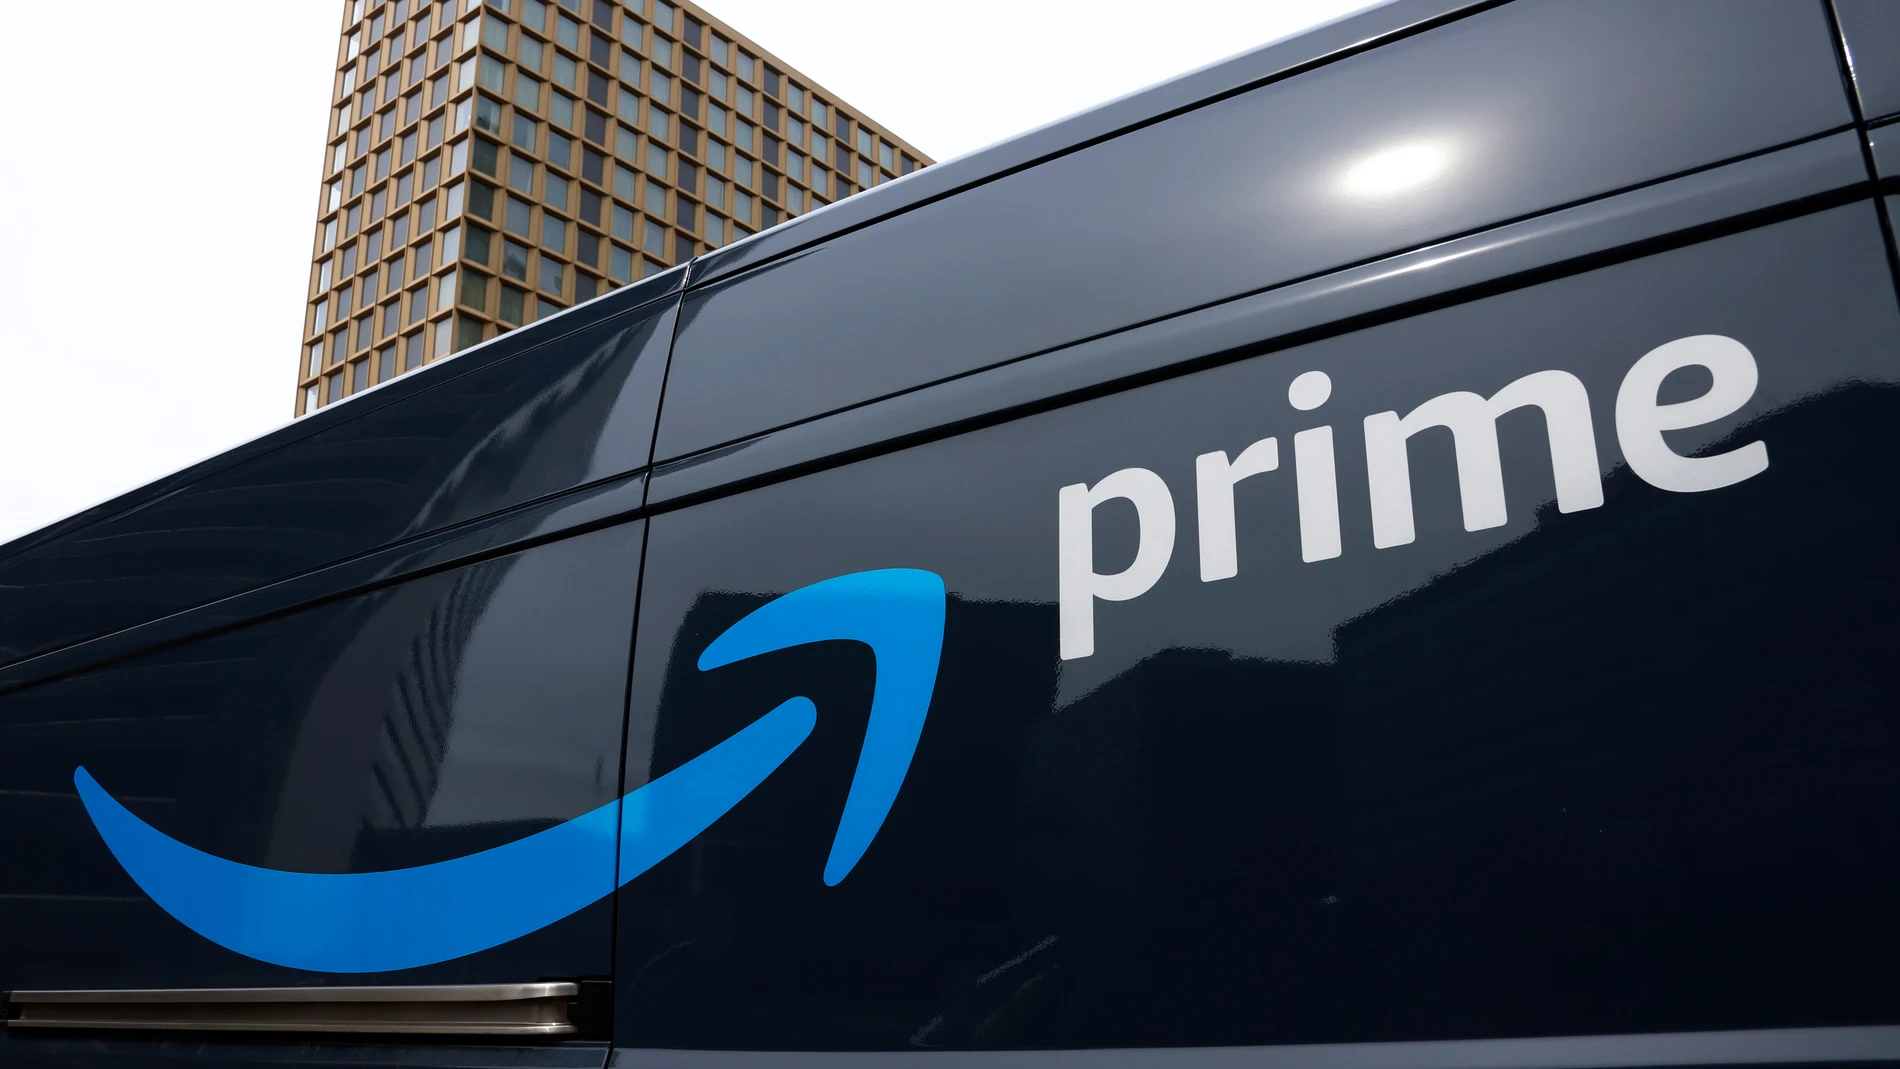 FILE - An Amazon Prime delivery vehicle is seen in downtown Pittsburgh on March 18, 2020. The Federal Trade Commission sued Amazon on Wednesday for what it called a years-long effort to enroll consumers without consent into its Prime program and making it difficult for them to cancel their subscriptions. (AP Photo/Gene J. Puskar, File)